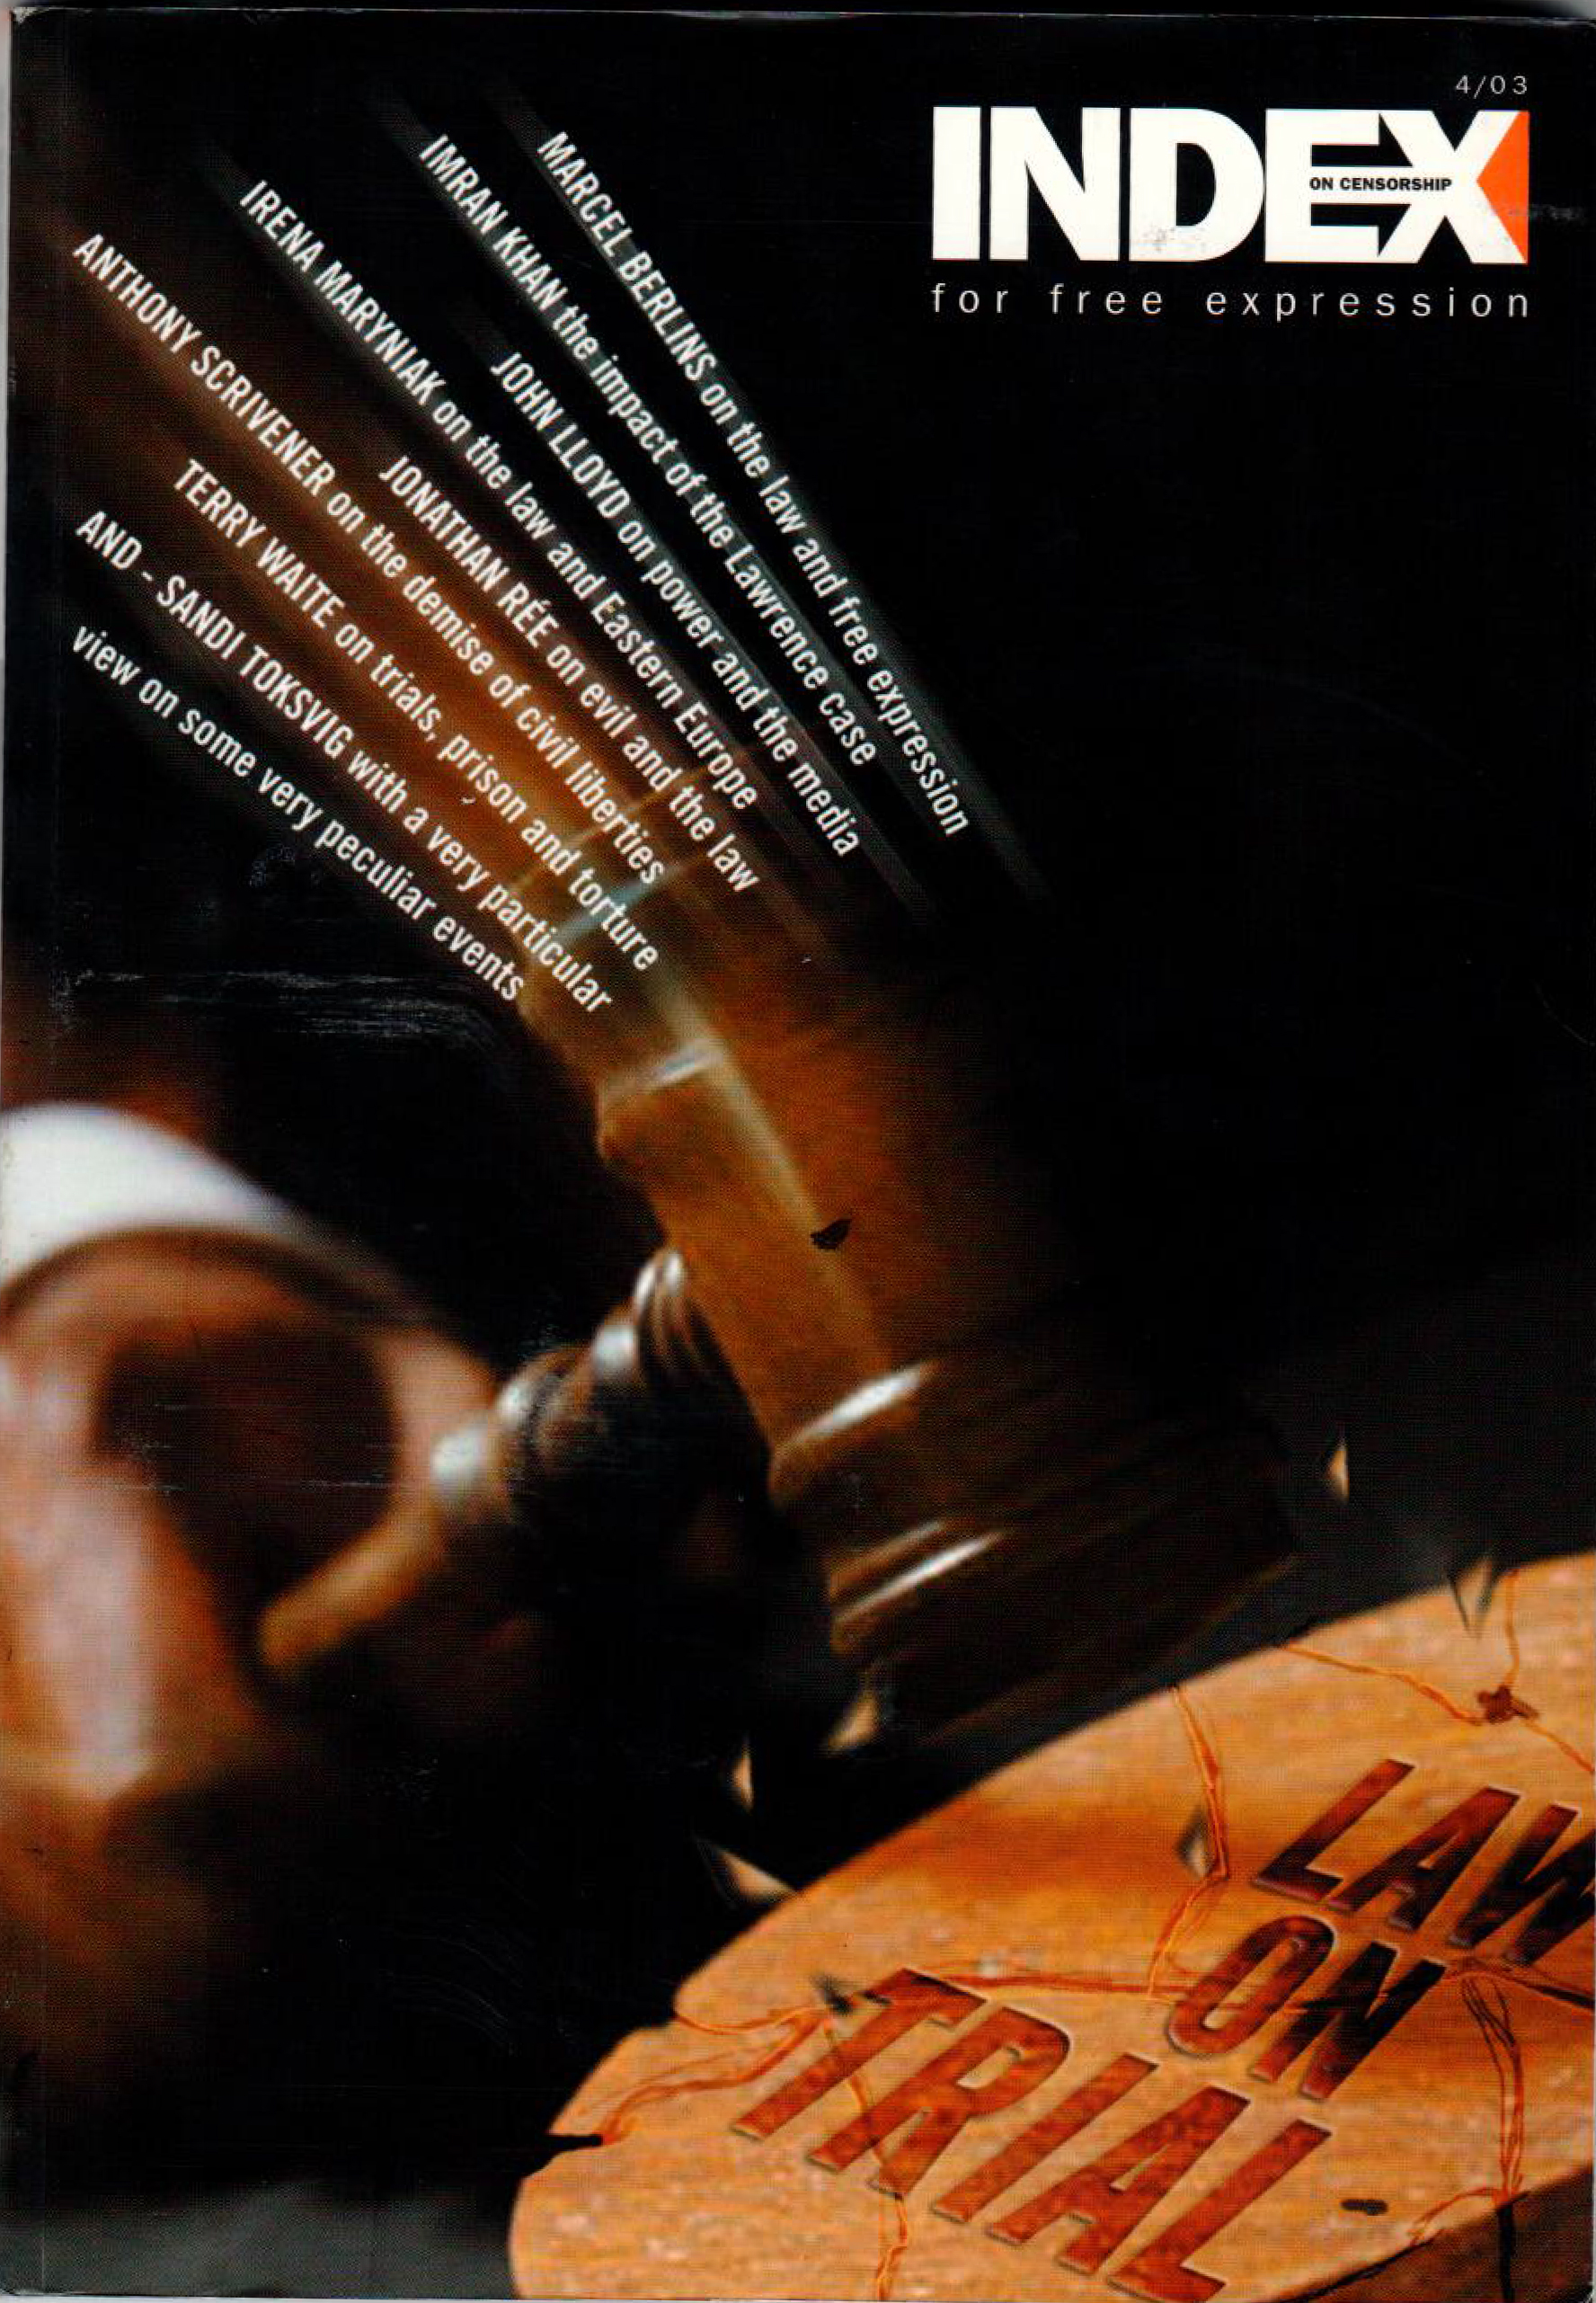 Law on trial, the winter 2003 issue of Index on Censorship magazine.